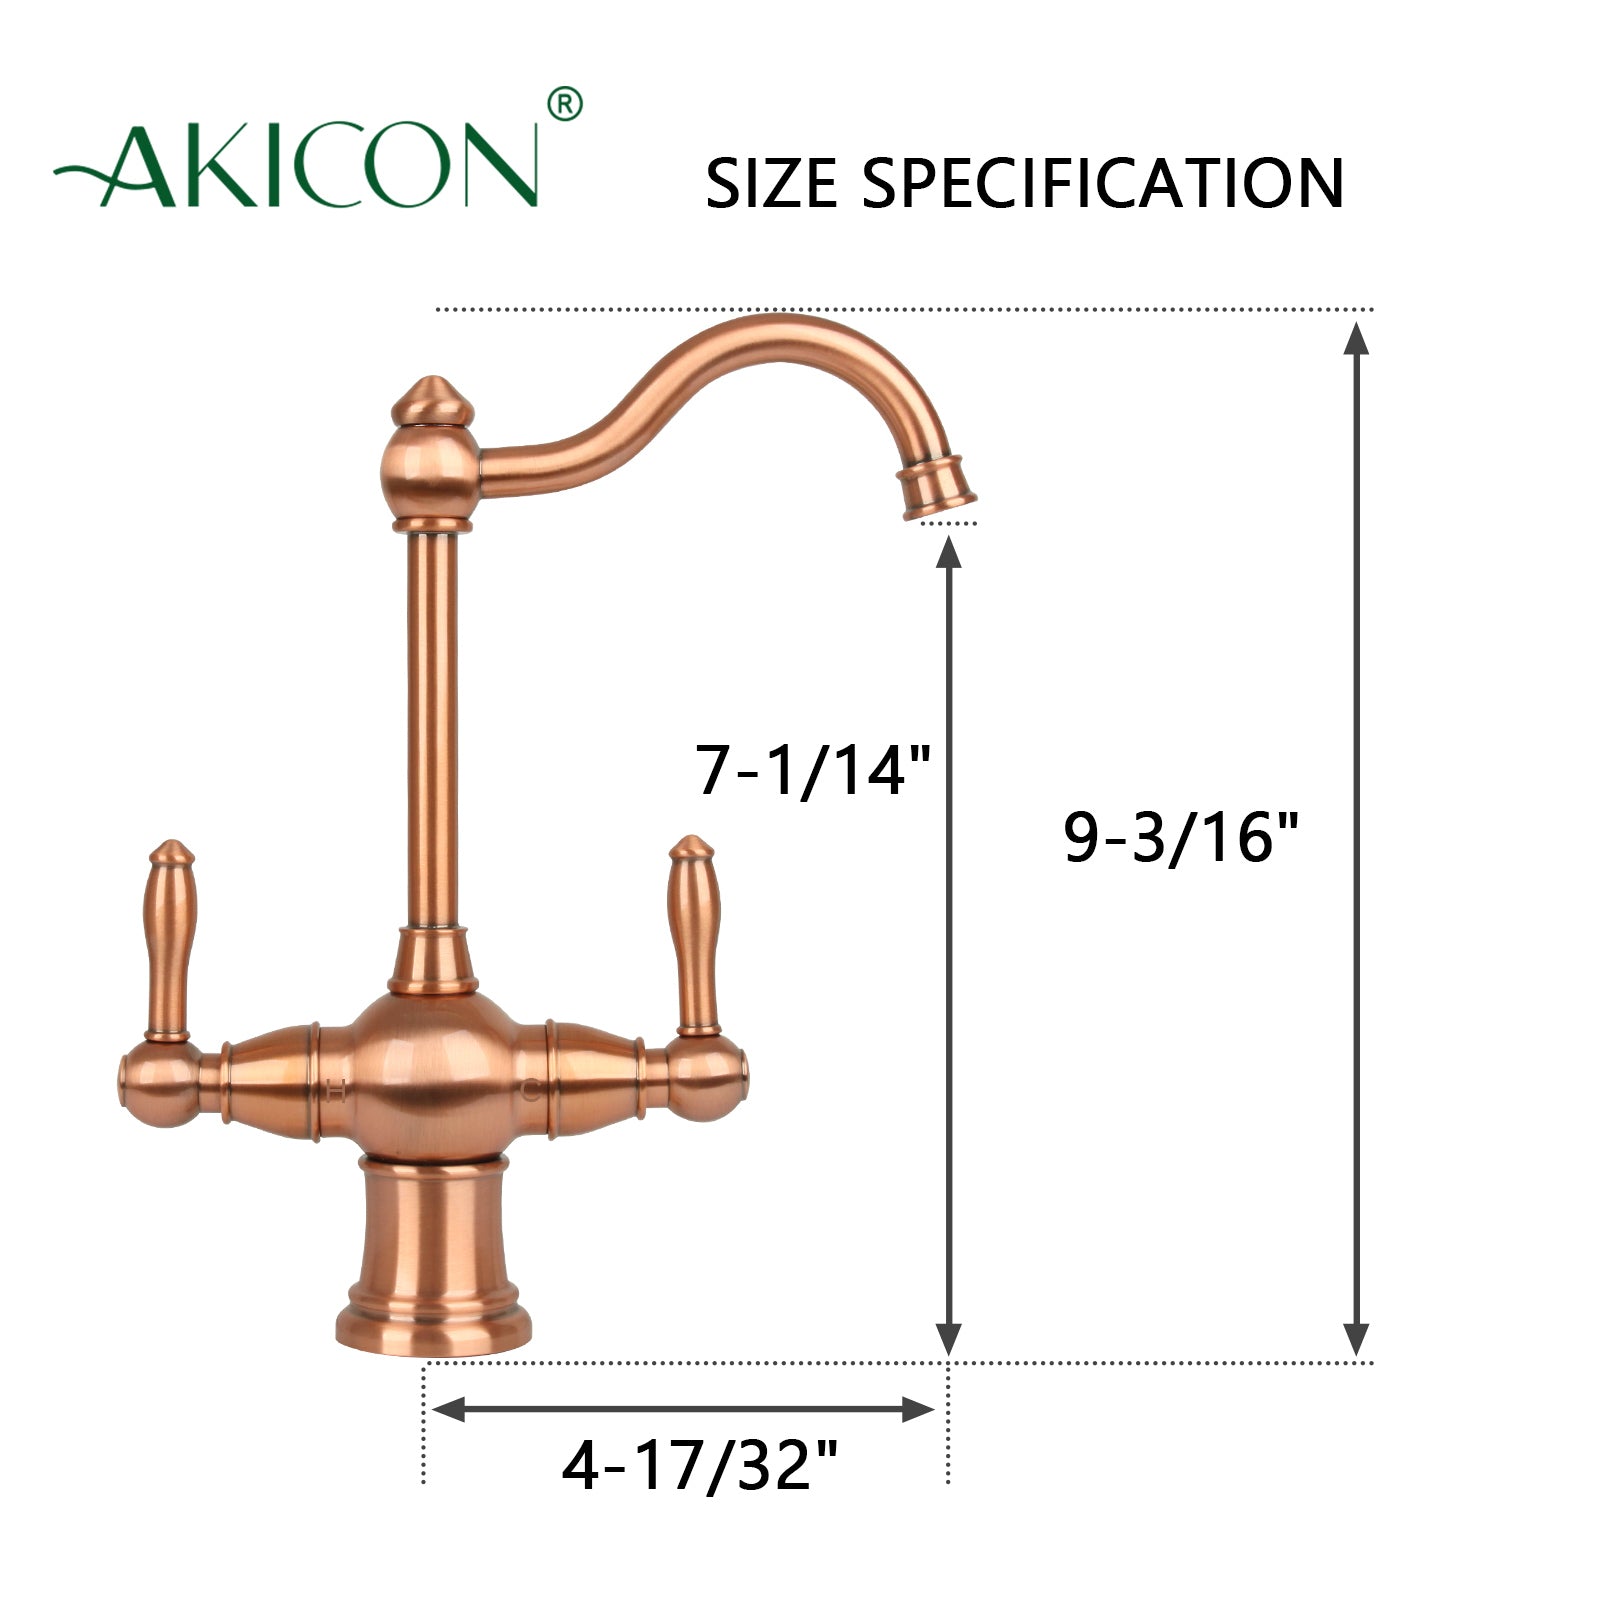 Two-Handles Copper Drinking Water Filter Faucet, Dual Lever Hot and Cold Water Faucet for Instant Hot Water Tank Dispenser & Filtration System - AK96218A1-C